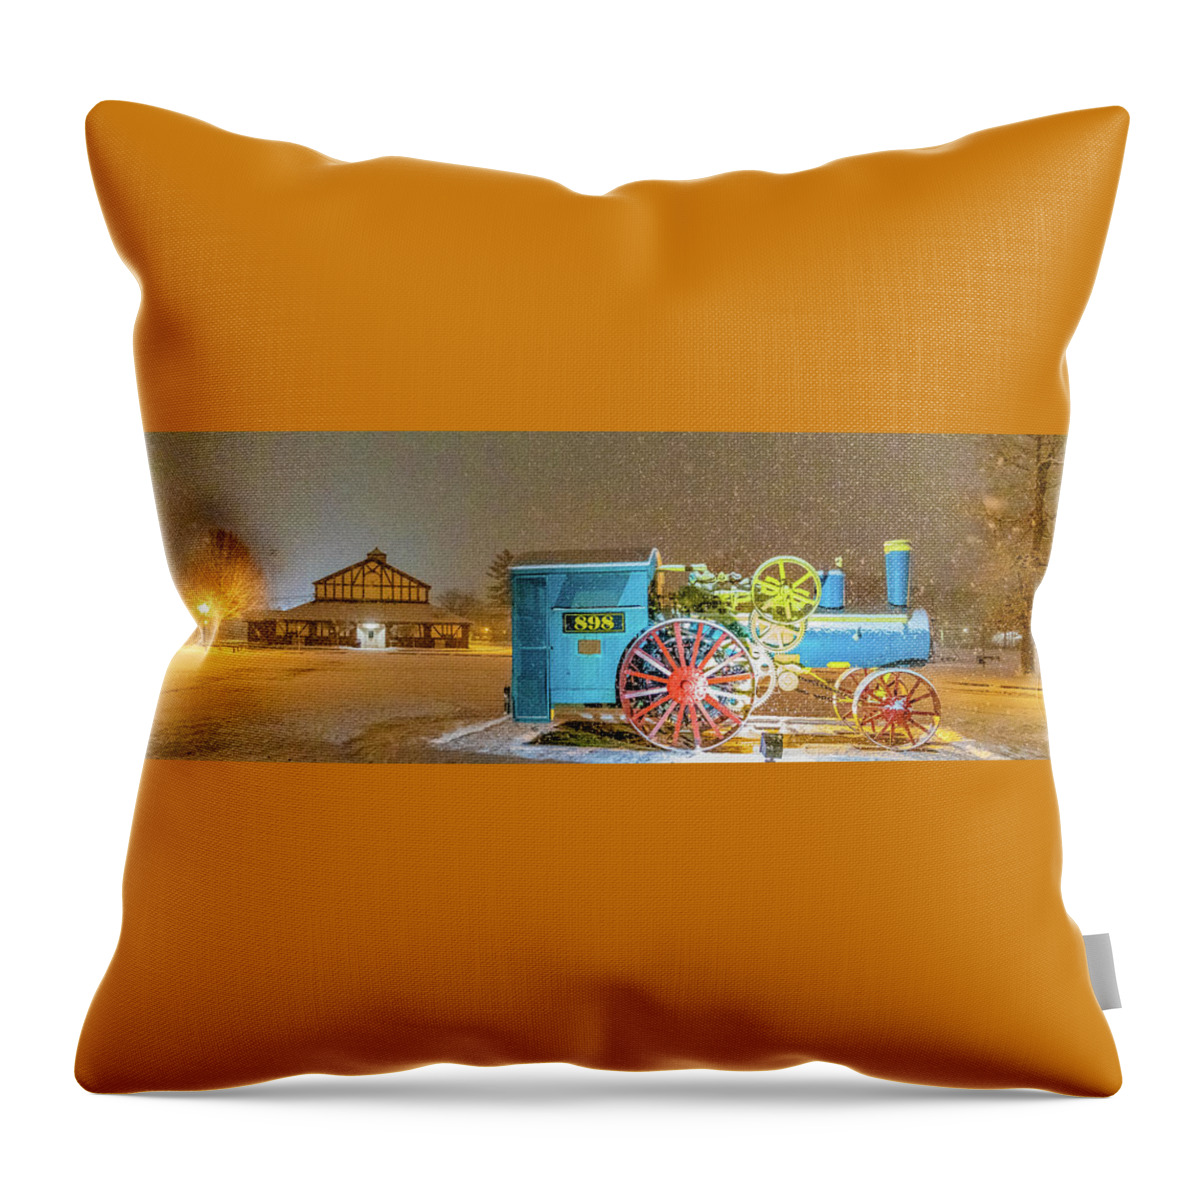 Tree Throw Pillow featuring the photograph Parkersburg City Park by Jonny D